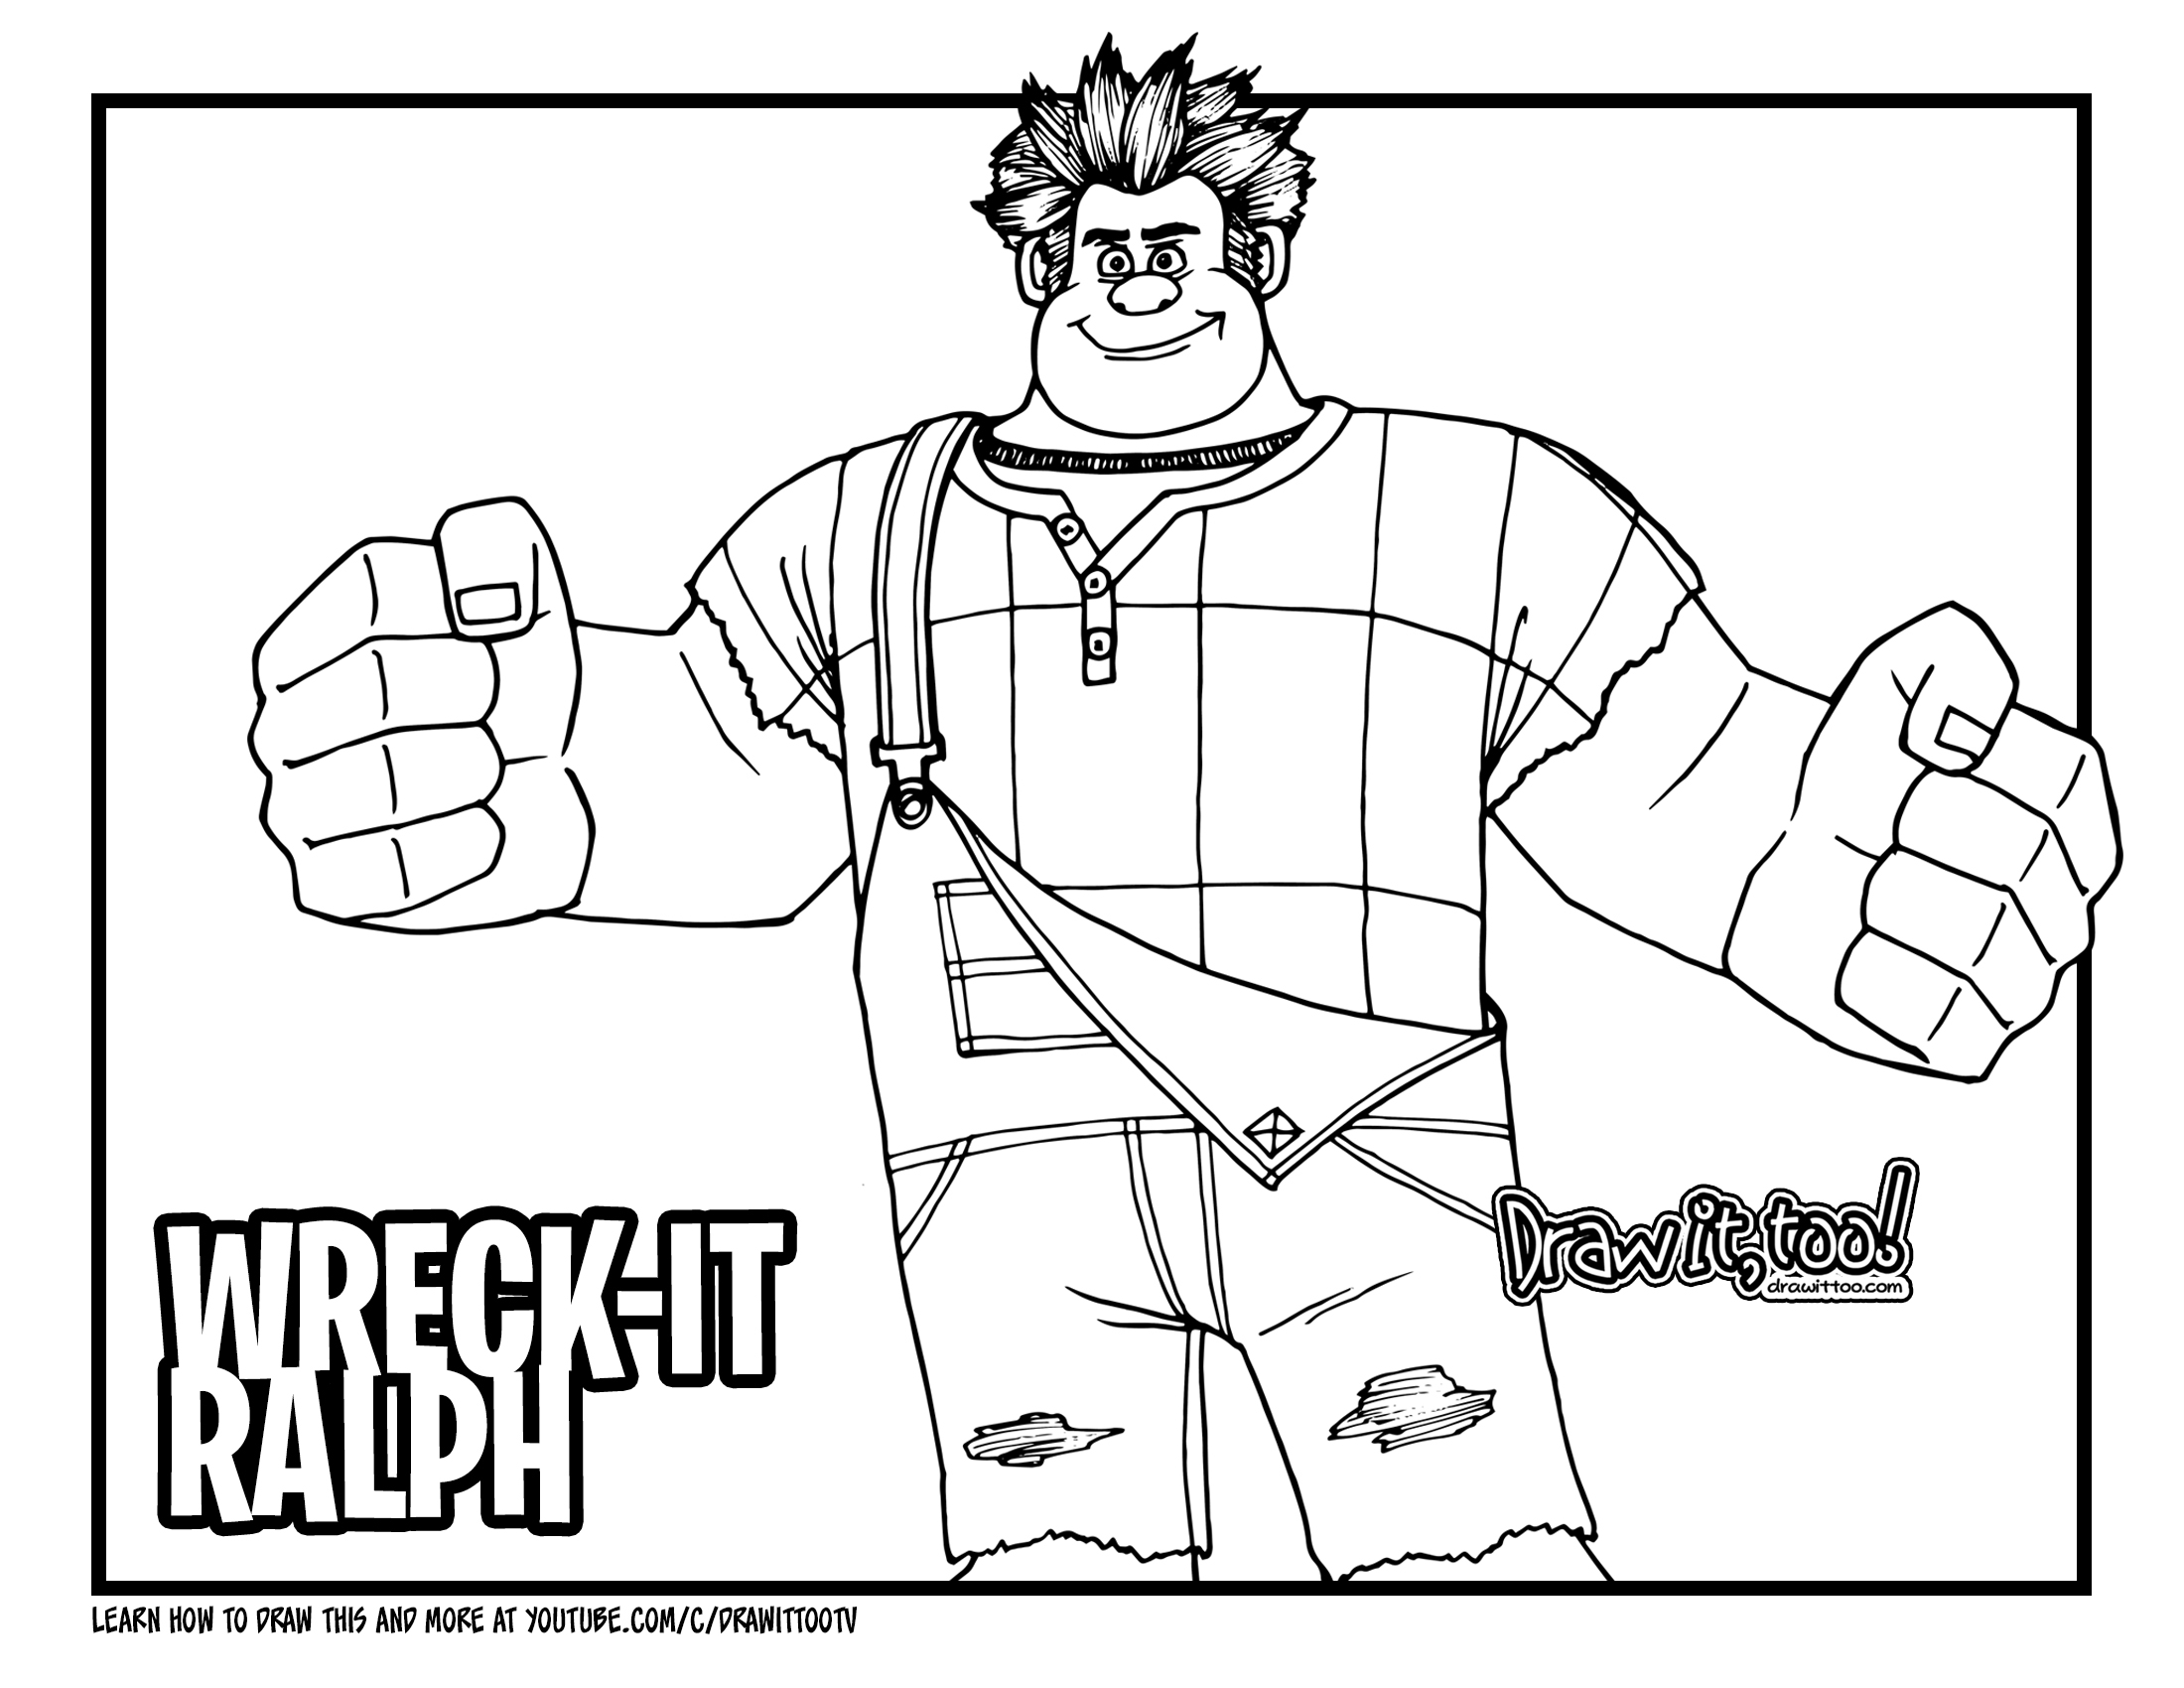 How to Draw WRECKIT RALPH (WreckIt Ralph) Drawing Tutorial Draw it